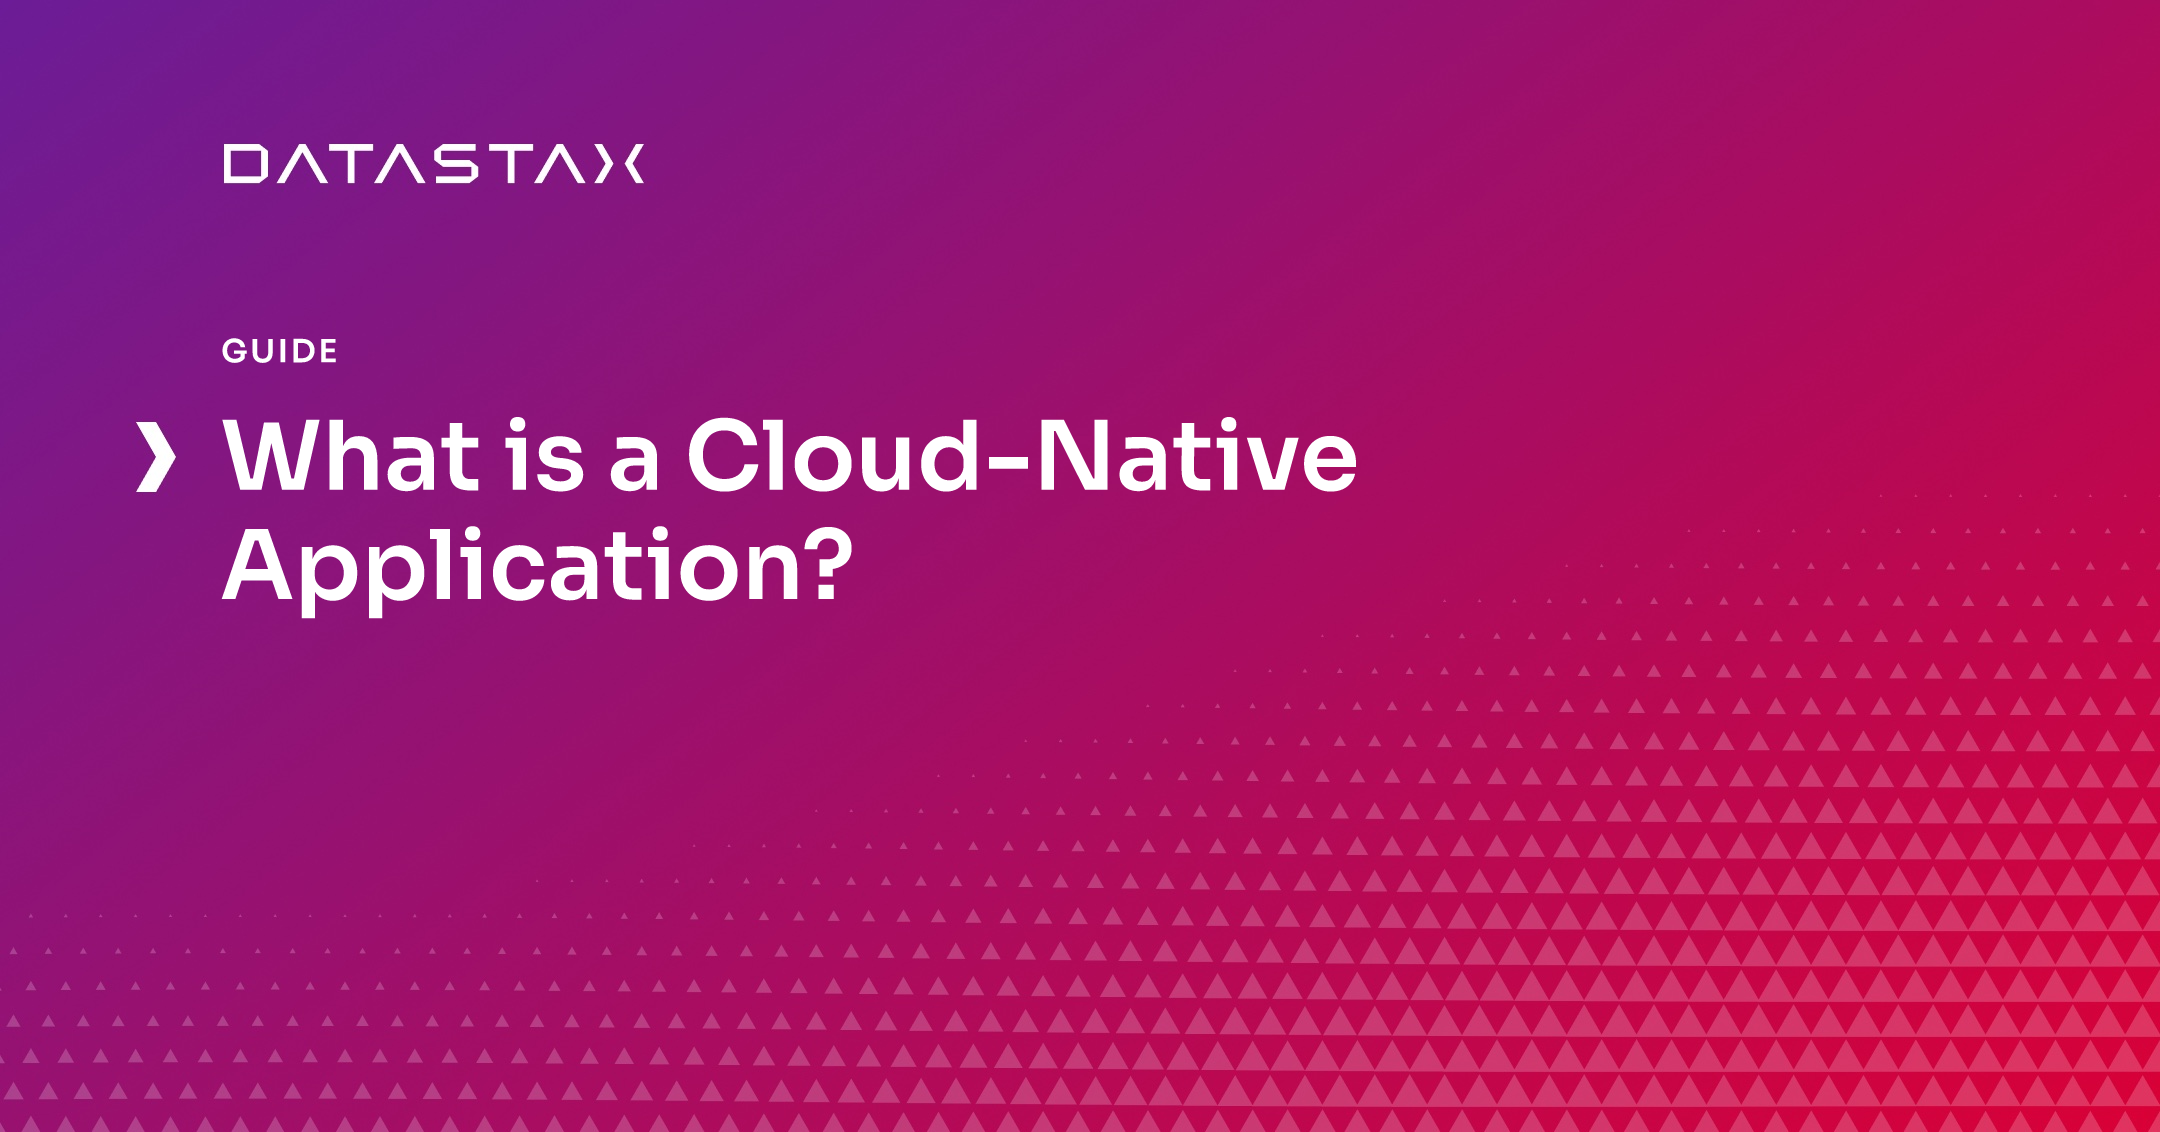 What is a Cloud-Native Application?